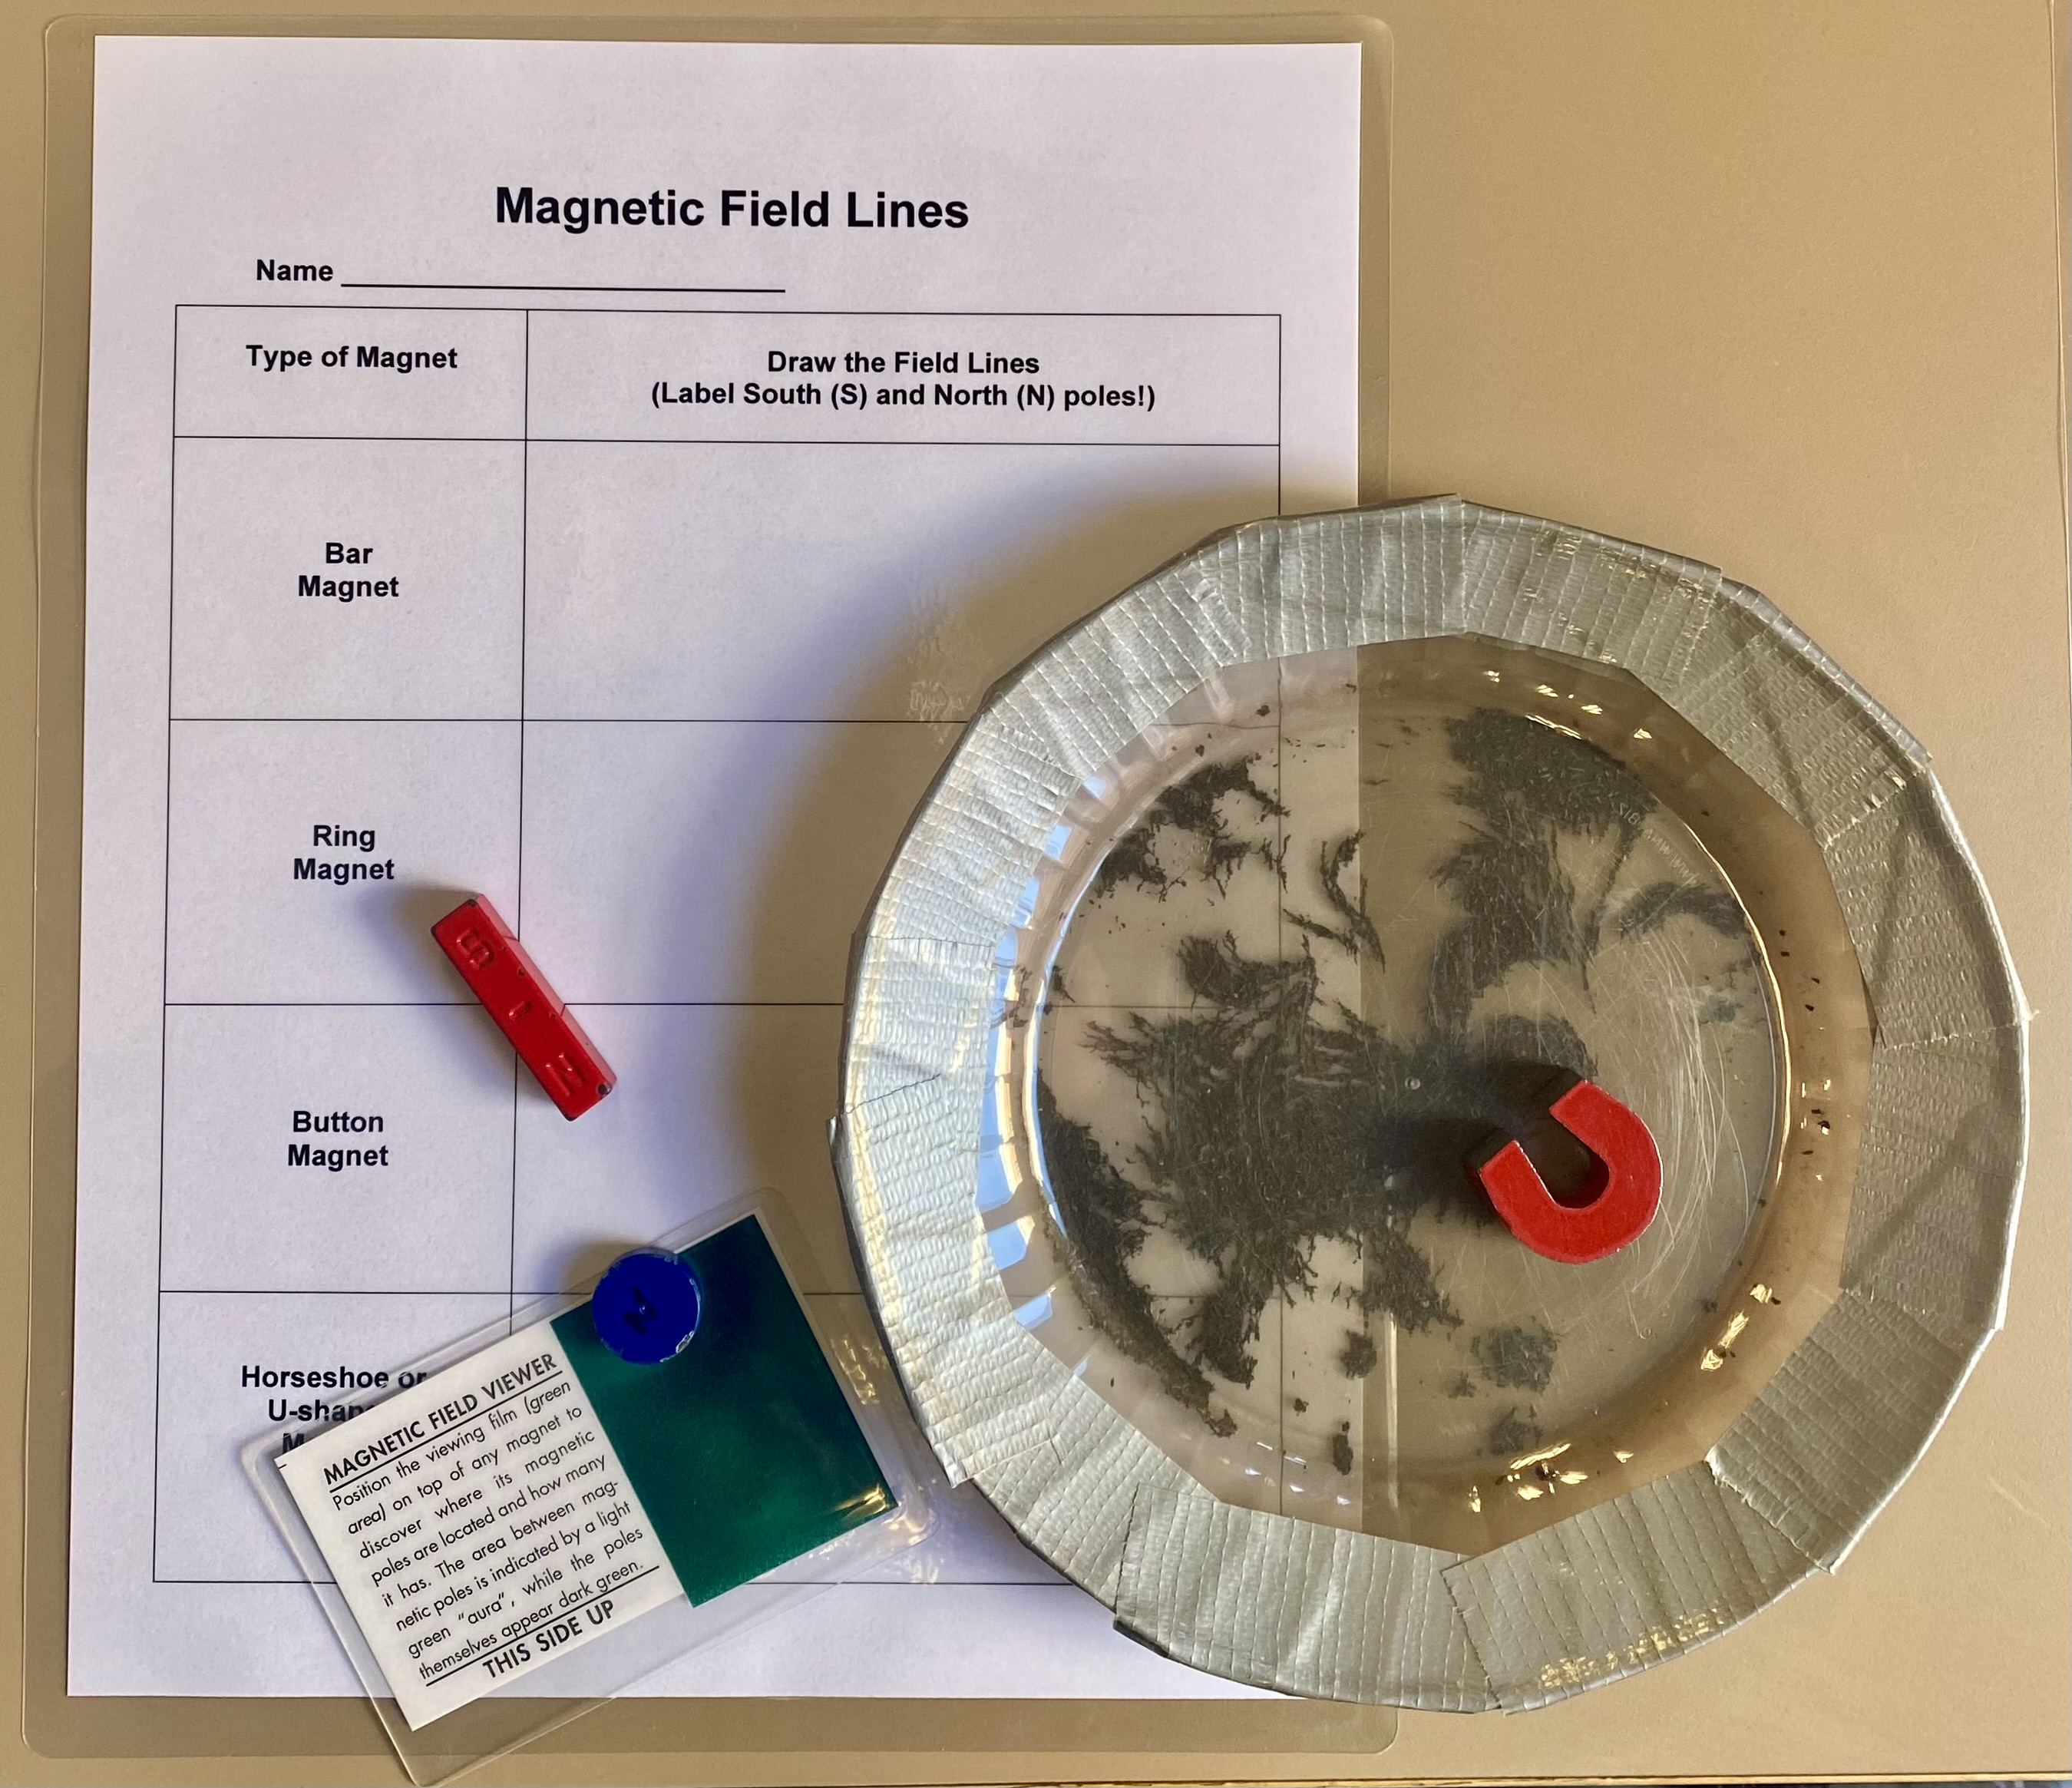 Magnetic Field Lines Magnetism Experiment